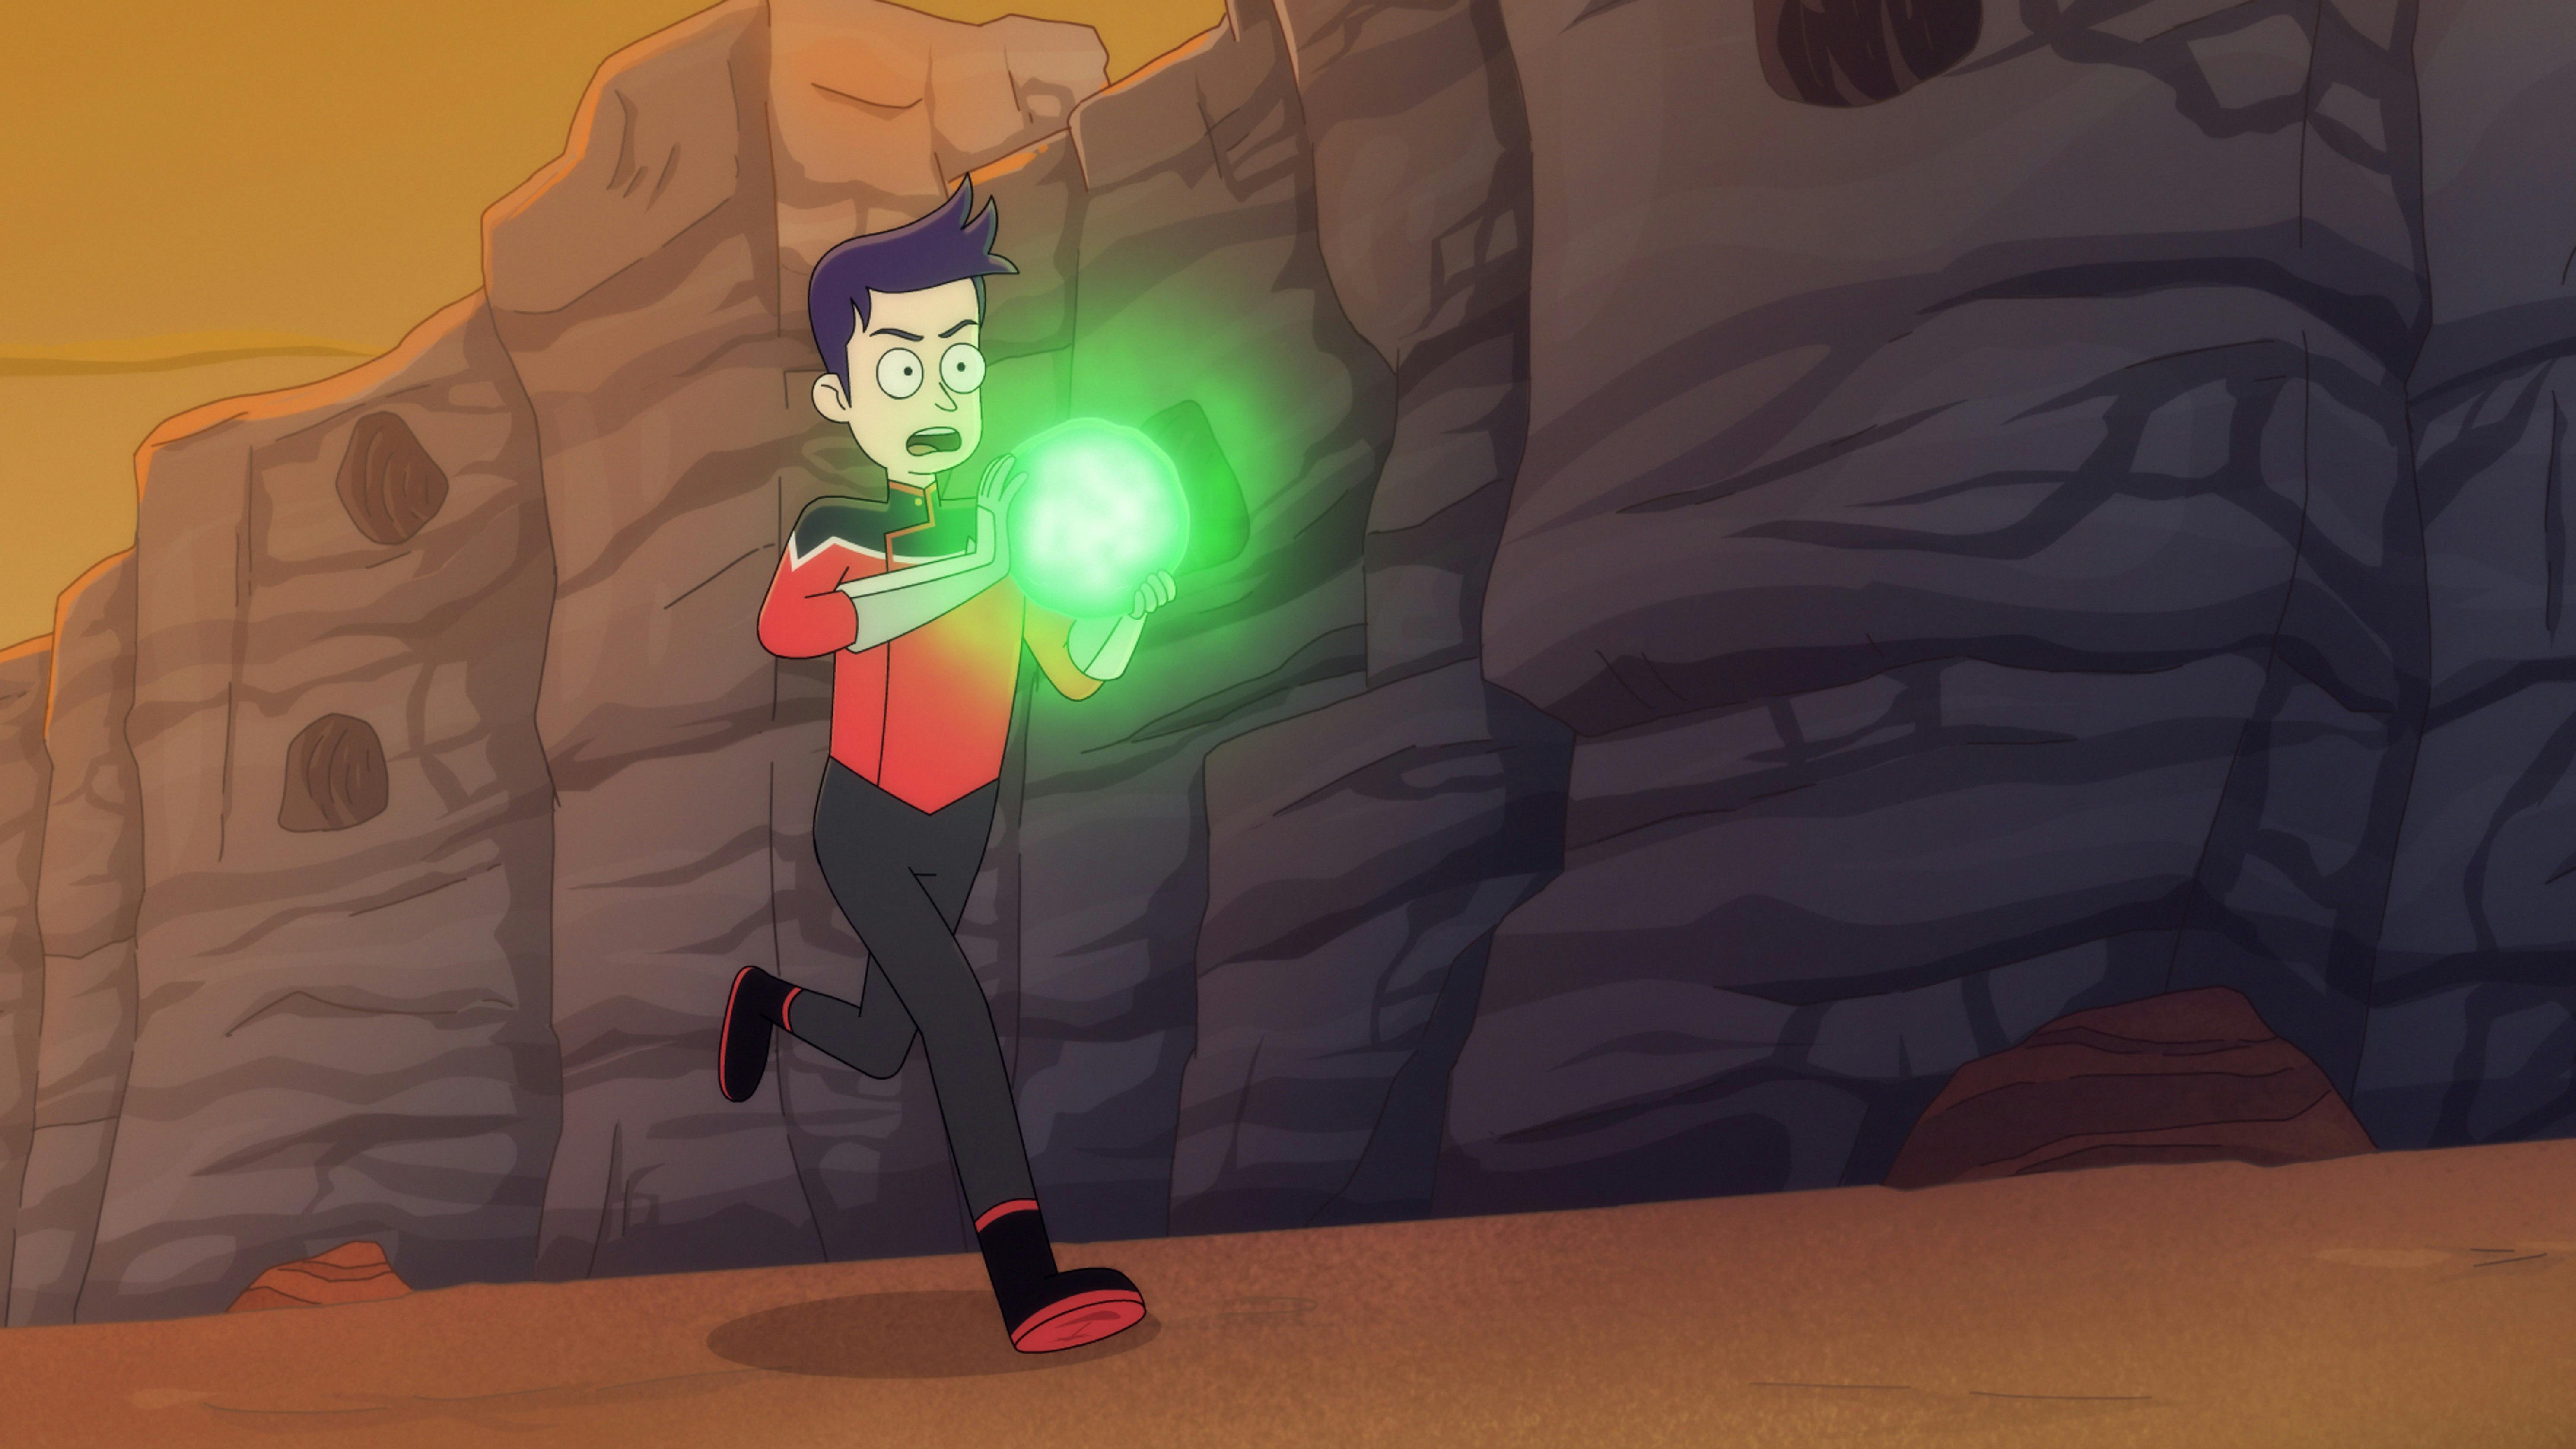 Boimler runs while carrying a glowing green orb in 'Mining The Mind's Mines'